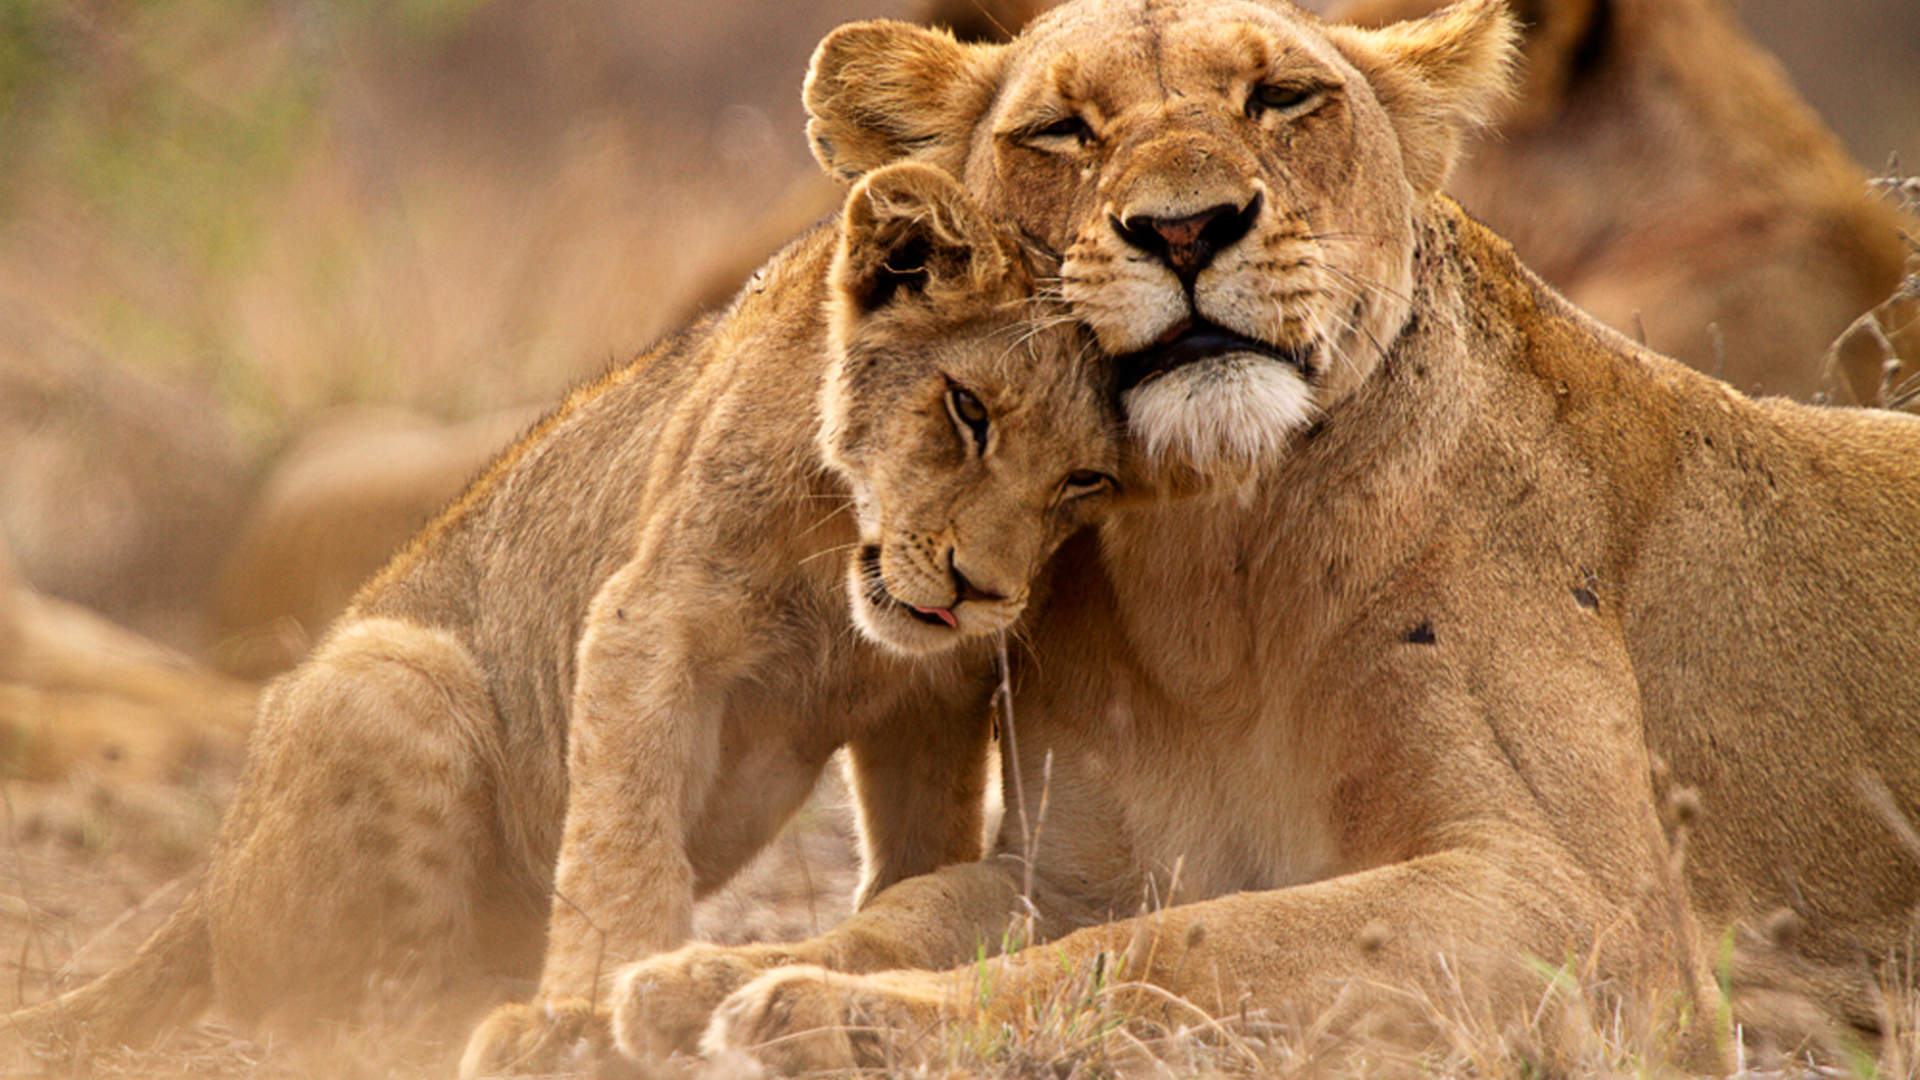 Lioness And Cub In The Kruger NP, South Africa